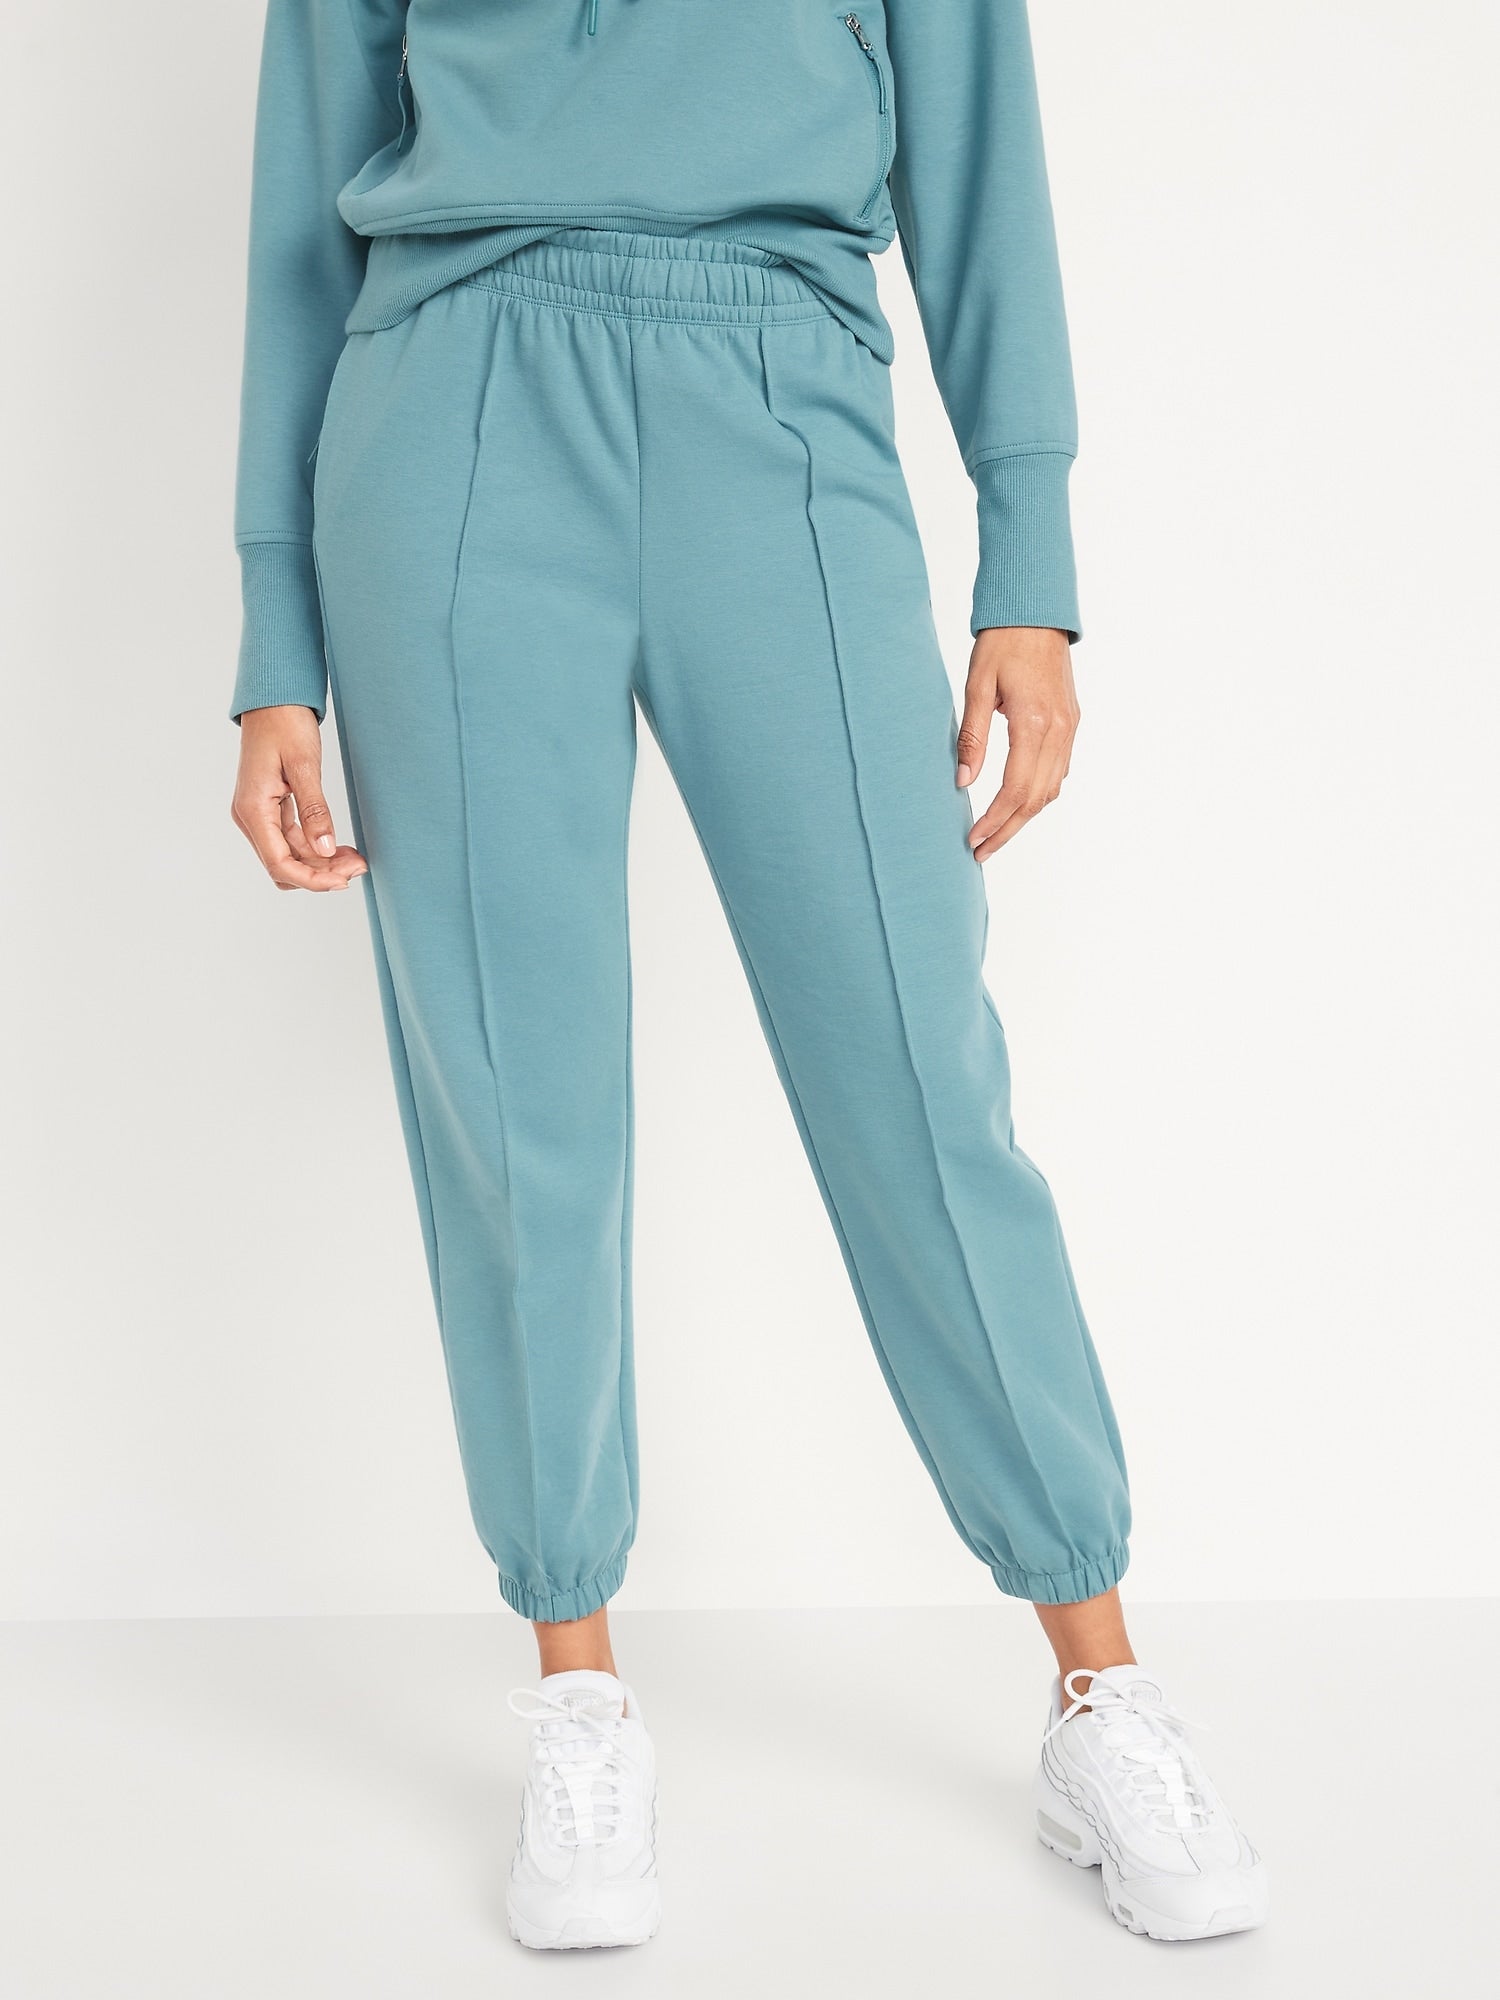 Old Navy High-Waisted Dynamic Fleece Pintucked Sweatpants for